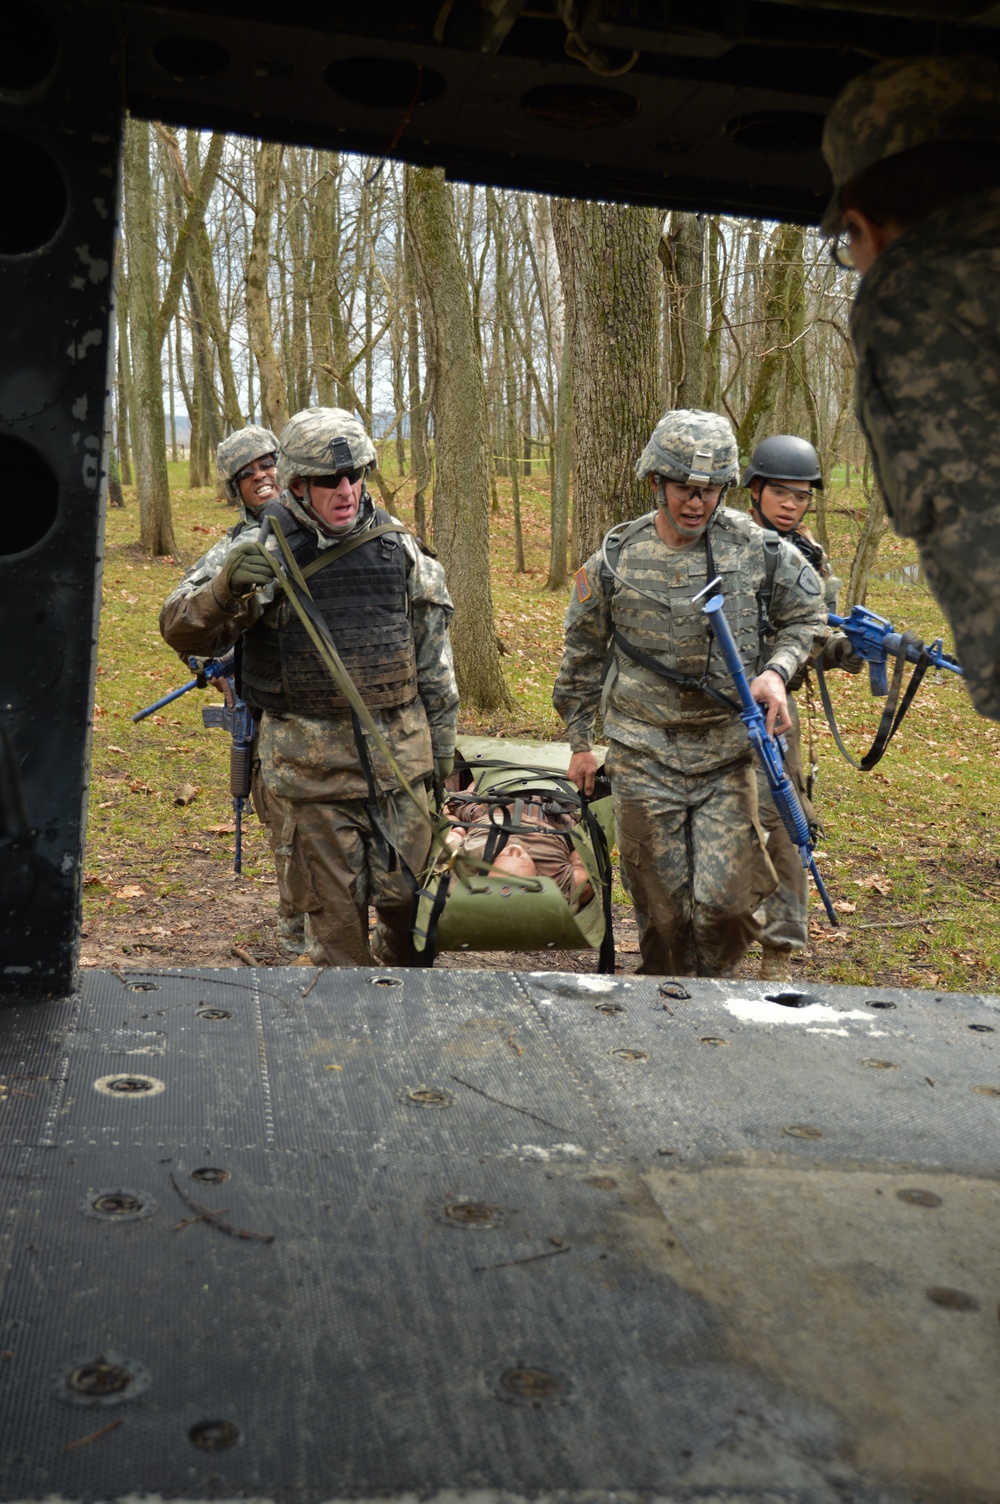 1413th Engineer Company conducts Pre-Deployment Training at Atterbury-Muscatatuck